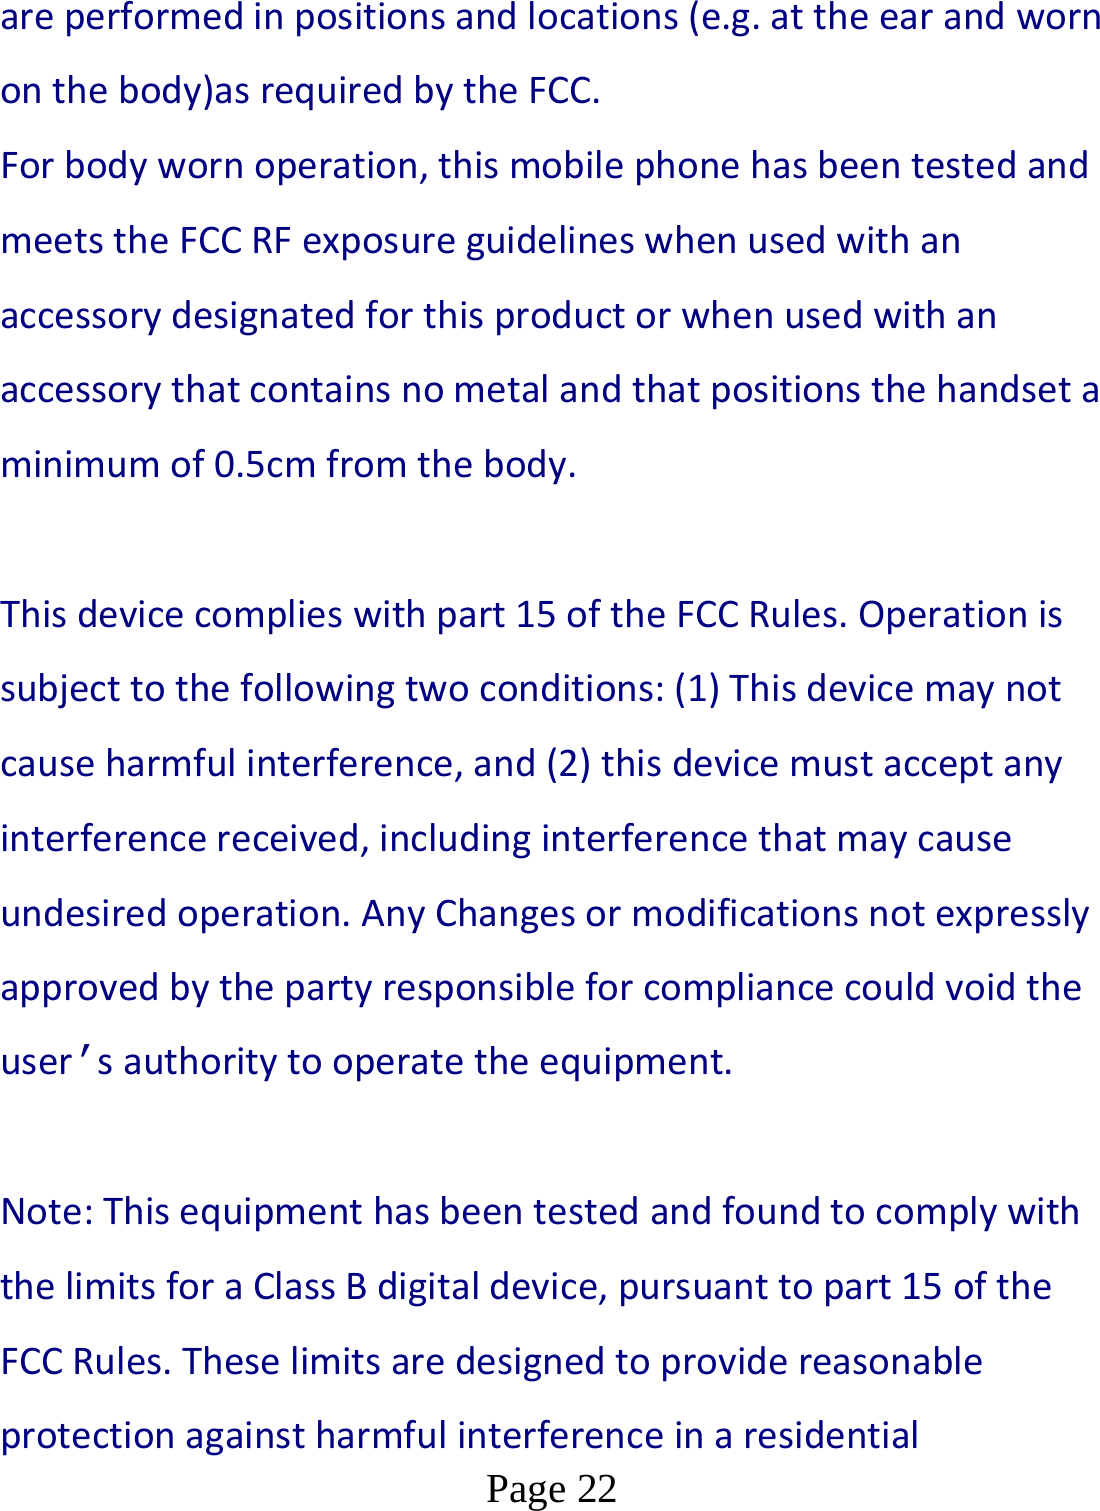  Page 22  are performed in positions and locations (e.g. at the ear and worn on the body)as required by the FCC. For body worn operation, this mobile phone has been tested and meets the FCC RF exposure guidelines when used with an accessory designated for this product or when used with an accessory that contains no metal and that positions the handset a minimum of 0.5cm from the body.   This device complies with part 15 of the FCC Rules. Operation is subject to the following two conditions: (1) This device may not cause harmful interference, and (2) this device must accept any interference received, including interference that may cause undesired operation. Any Changes or modifications not expressly approved by the party responsible for compliance could void the user’s authority to operate the equipment.      Note: This equipment has been tested and found to comply with the limits for a Class B digital device, pursuant to part 15 of the FCC Rules. These limits are designed to provide reasonable protection against harmful interference in a residential 